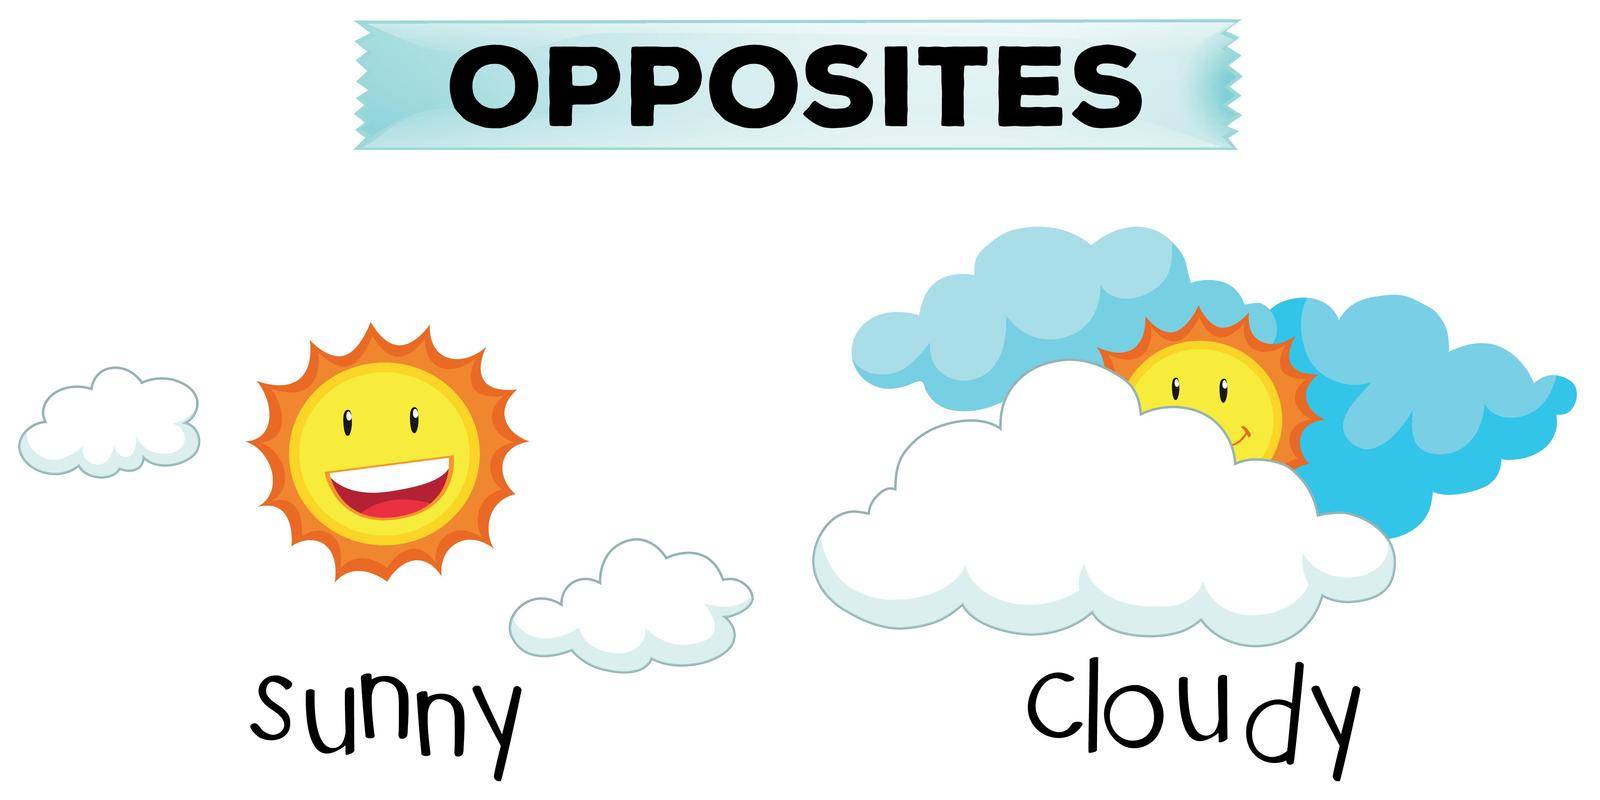 Opposite words for sunny and cloudy by iimages